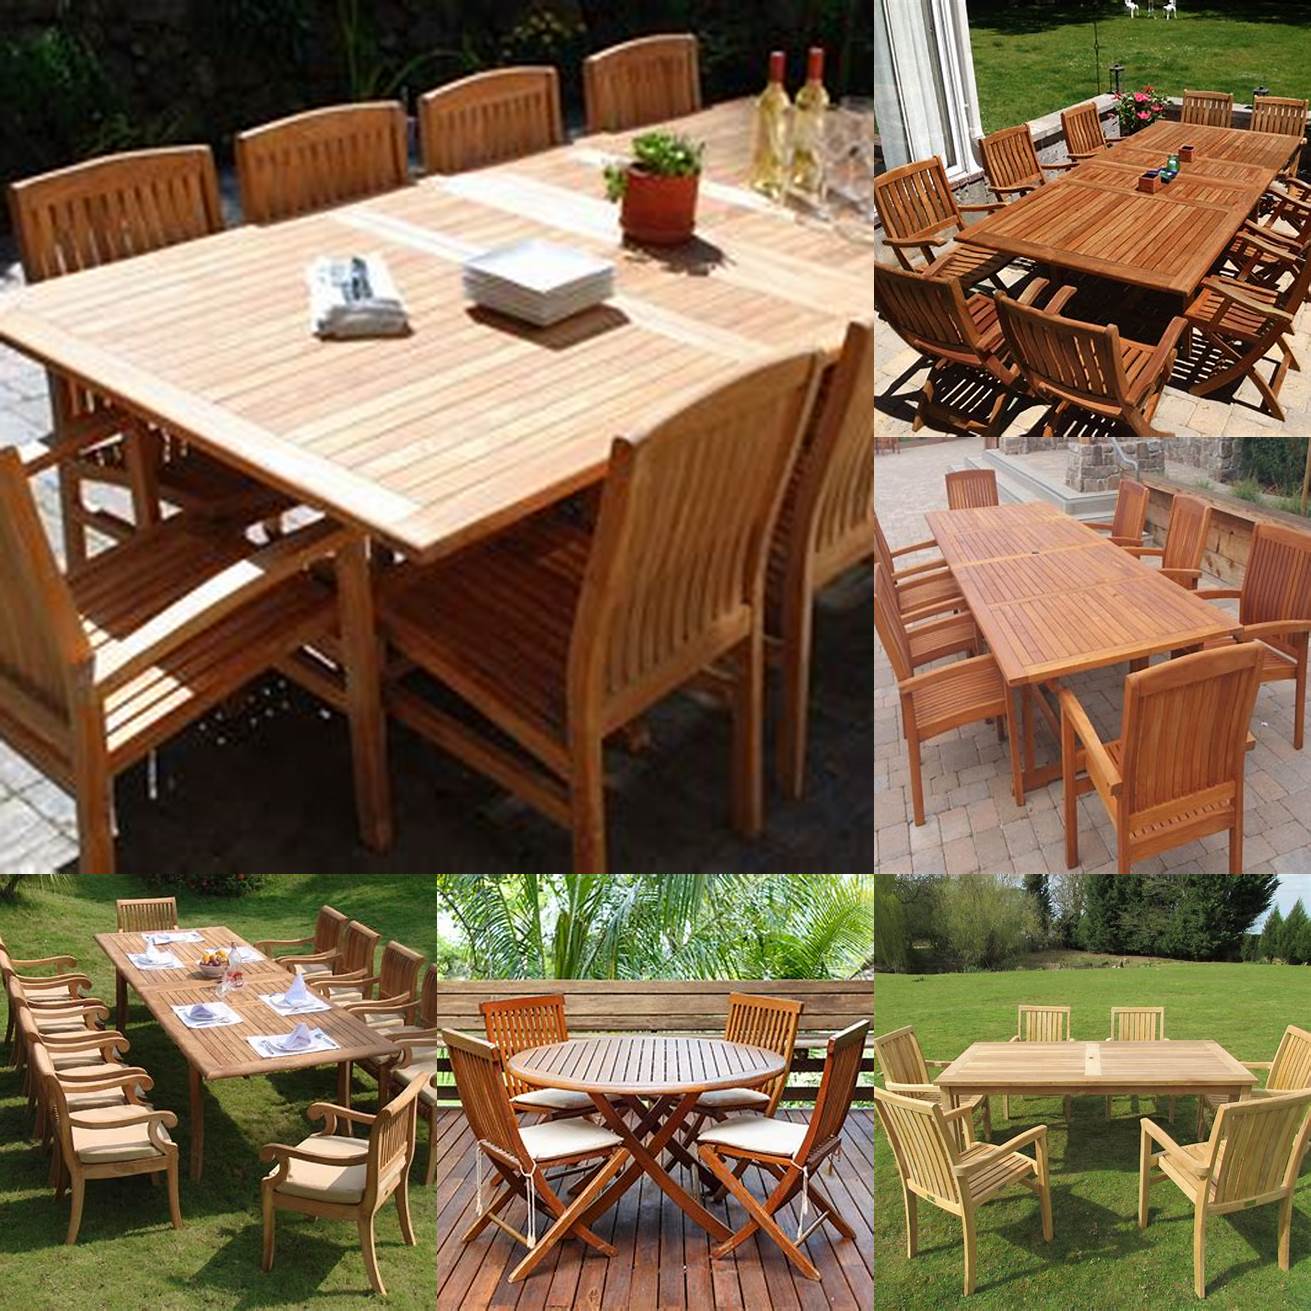 A Collection Of UEAED Teak Furniture Pieces